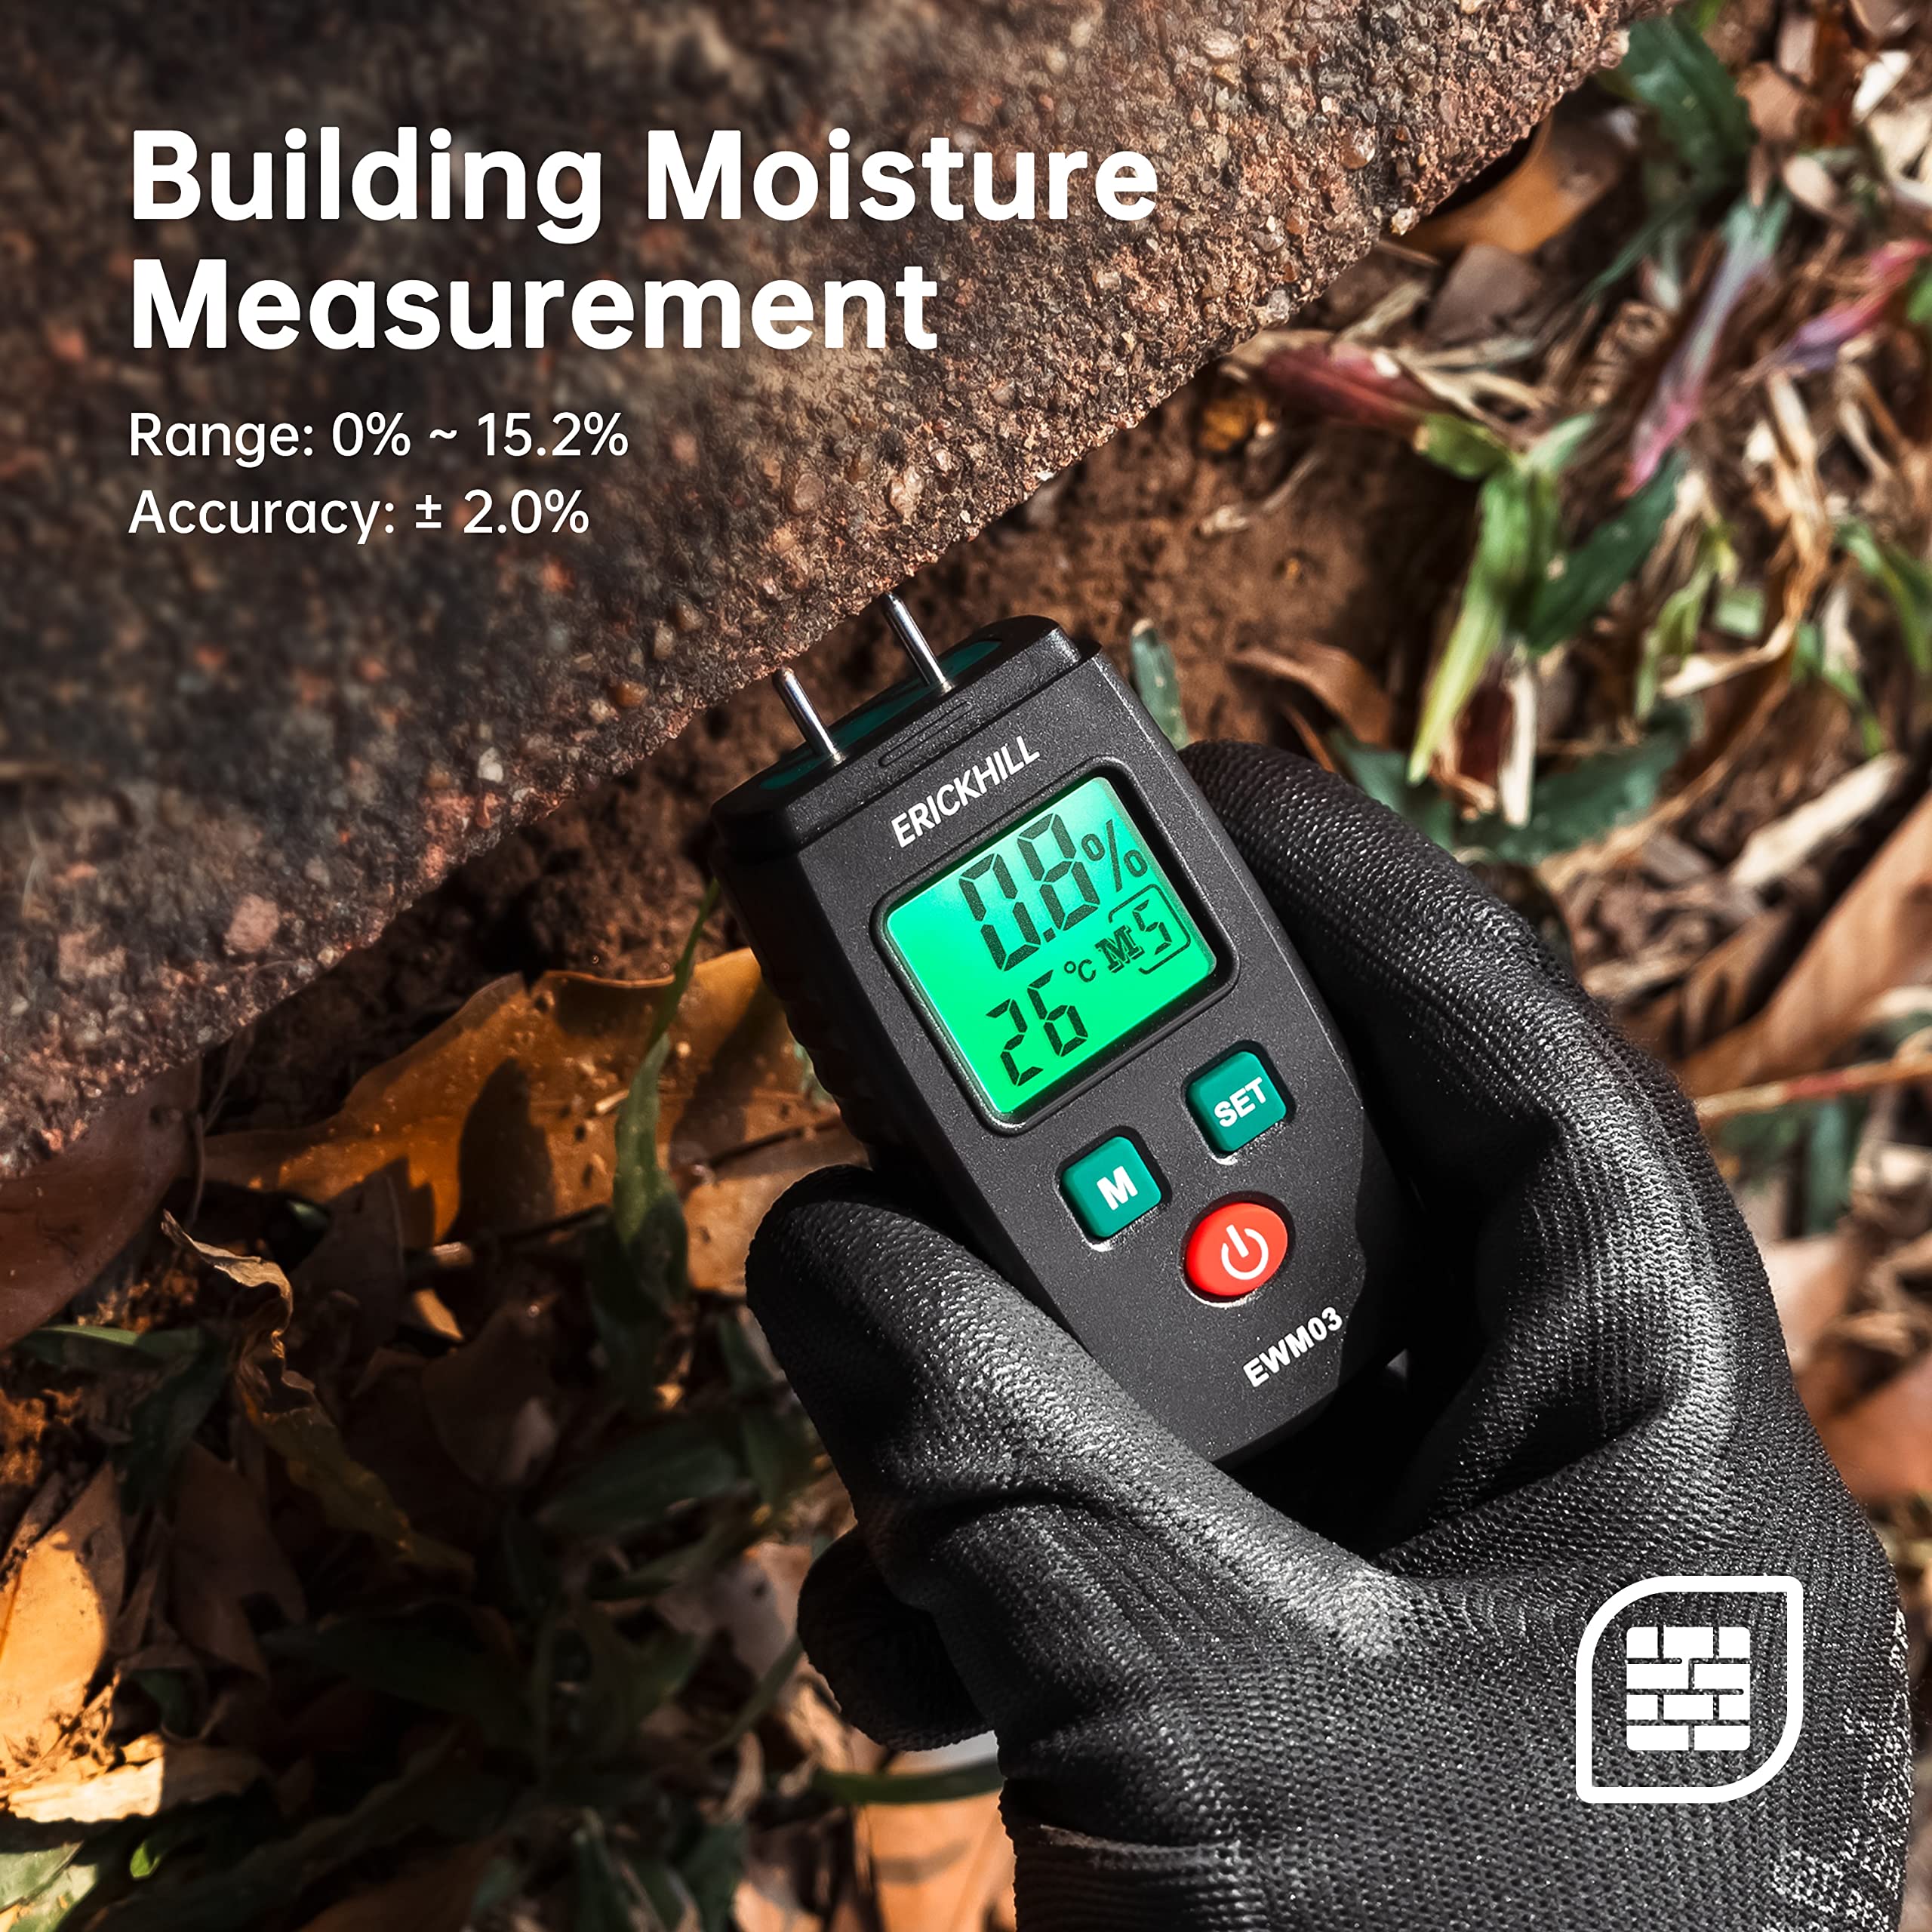 ERICKHILL EWM03 Wood Moisture Meter, Pocket Size Wood Moisture Detector with Green Backlight LCD Display, Pin Type Water Leak Detector with 5 Modes for Wood, Walls, Firewood, Bricks, Lumber, Floor